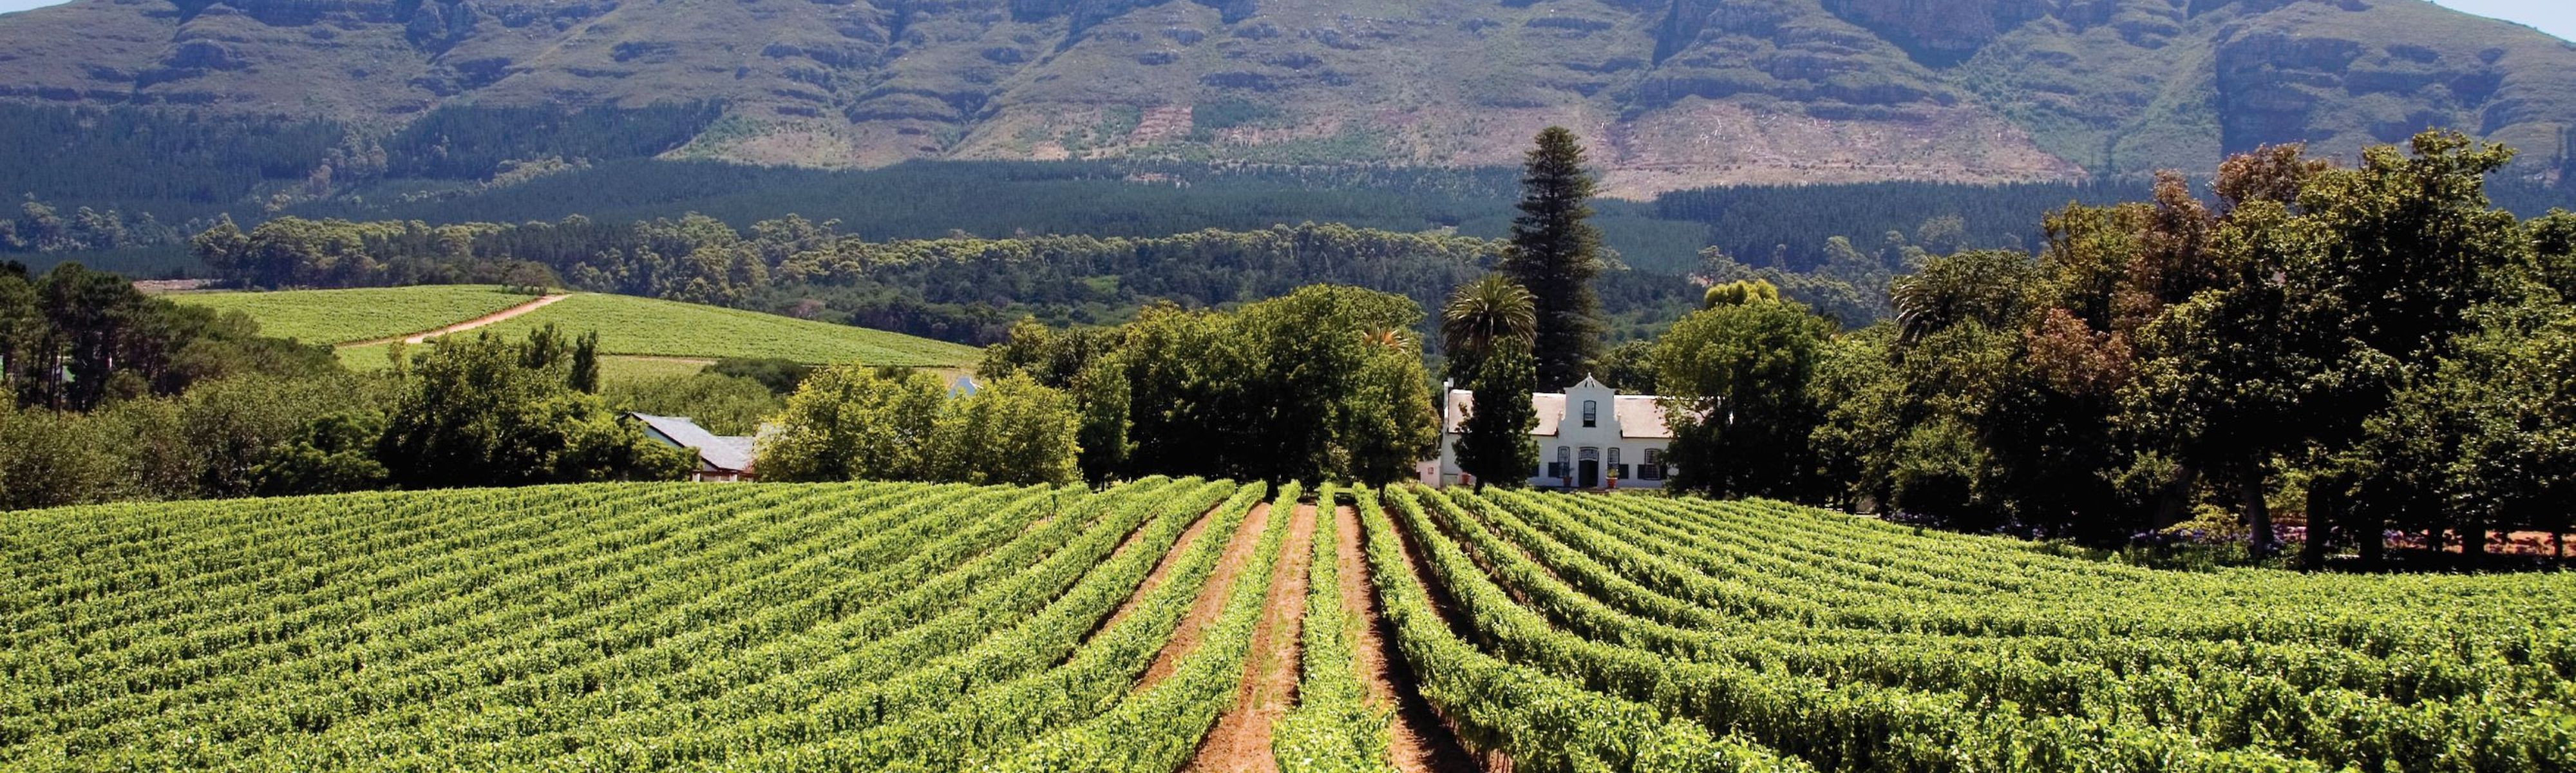 vineyard in constantia in cape town south africa